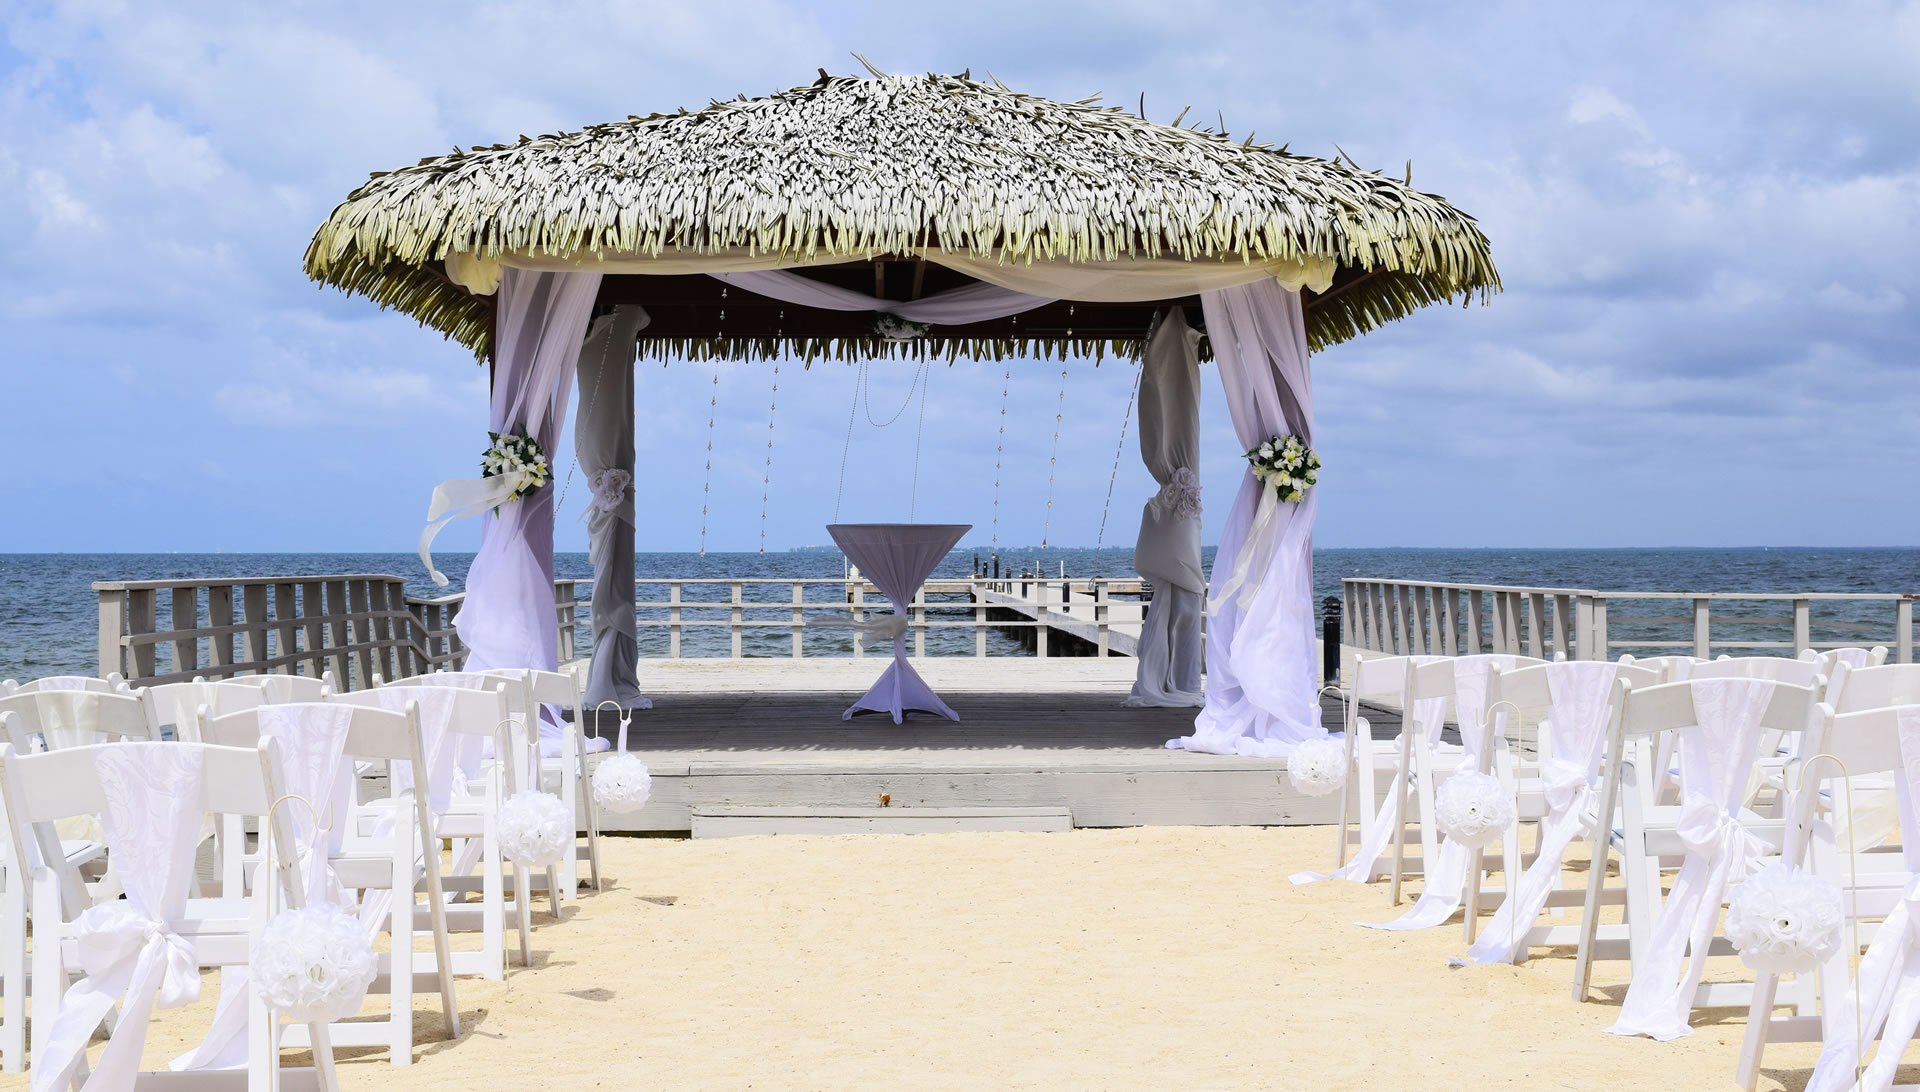 A cabana next to the fishing pier at the Grand Caymanian Resort that has been fashioned to be a wedding altar.